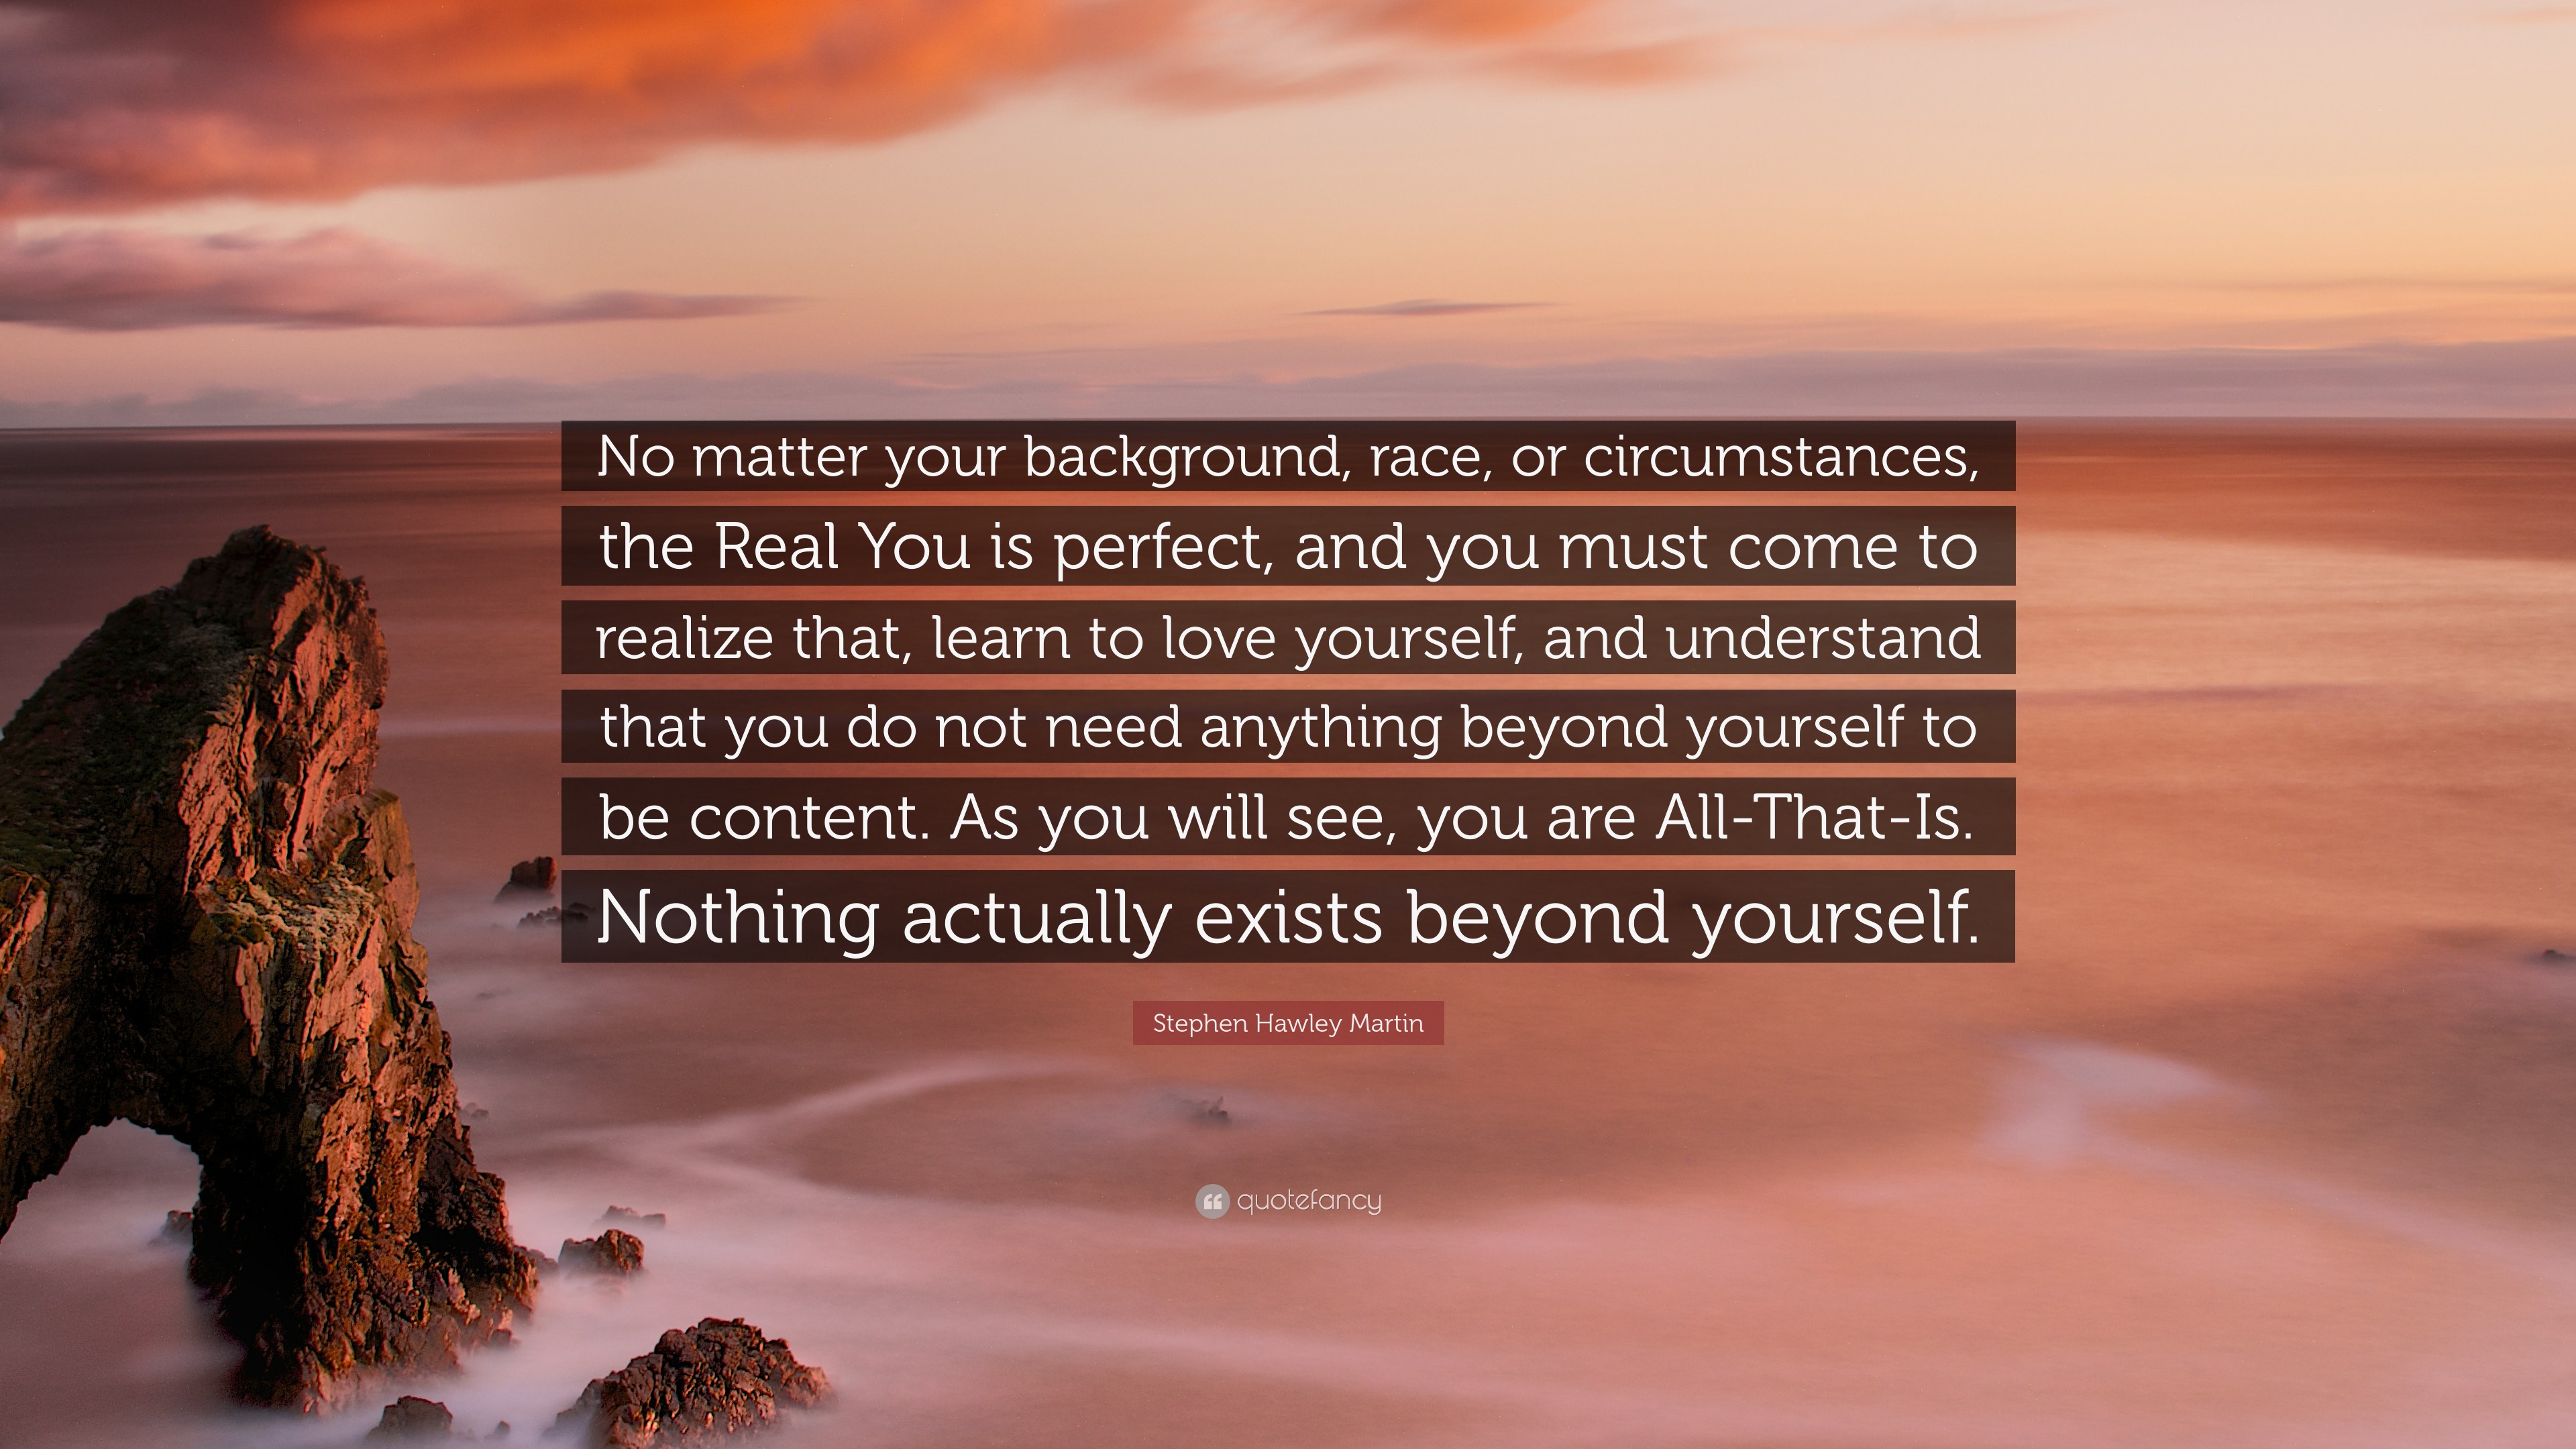 Stephen Hawley Martin Quote: “No matter your background, race, or  circumstances, the Real You is perfect, and you must come to realize that,  learn to ...”